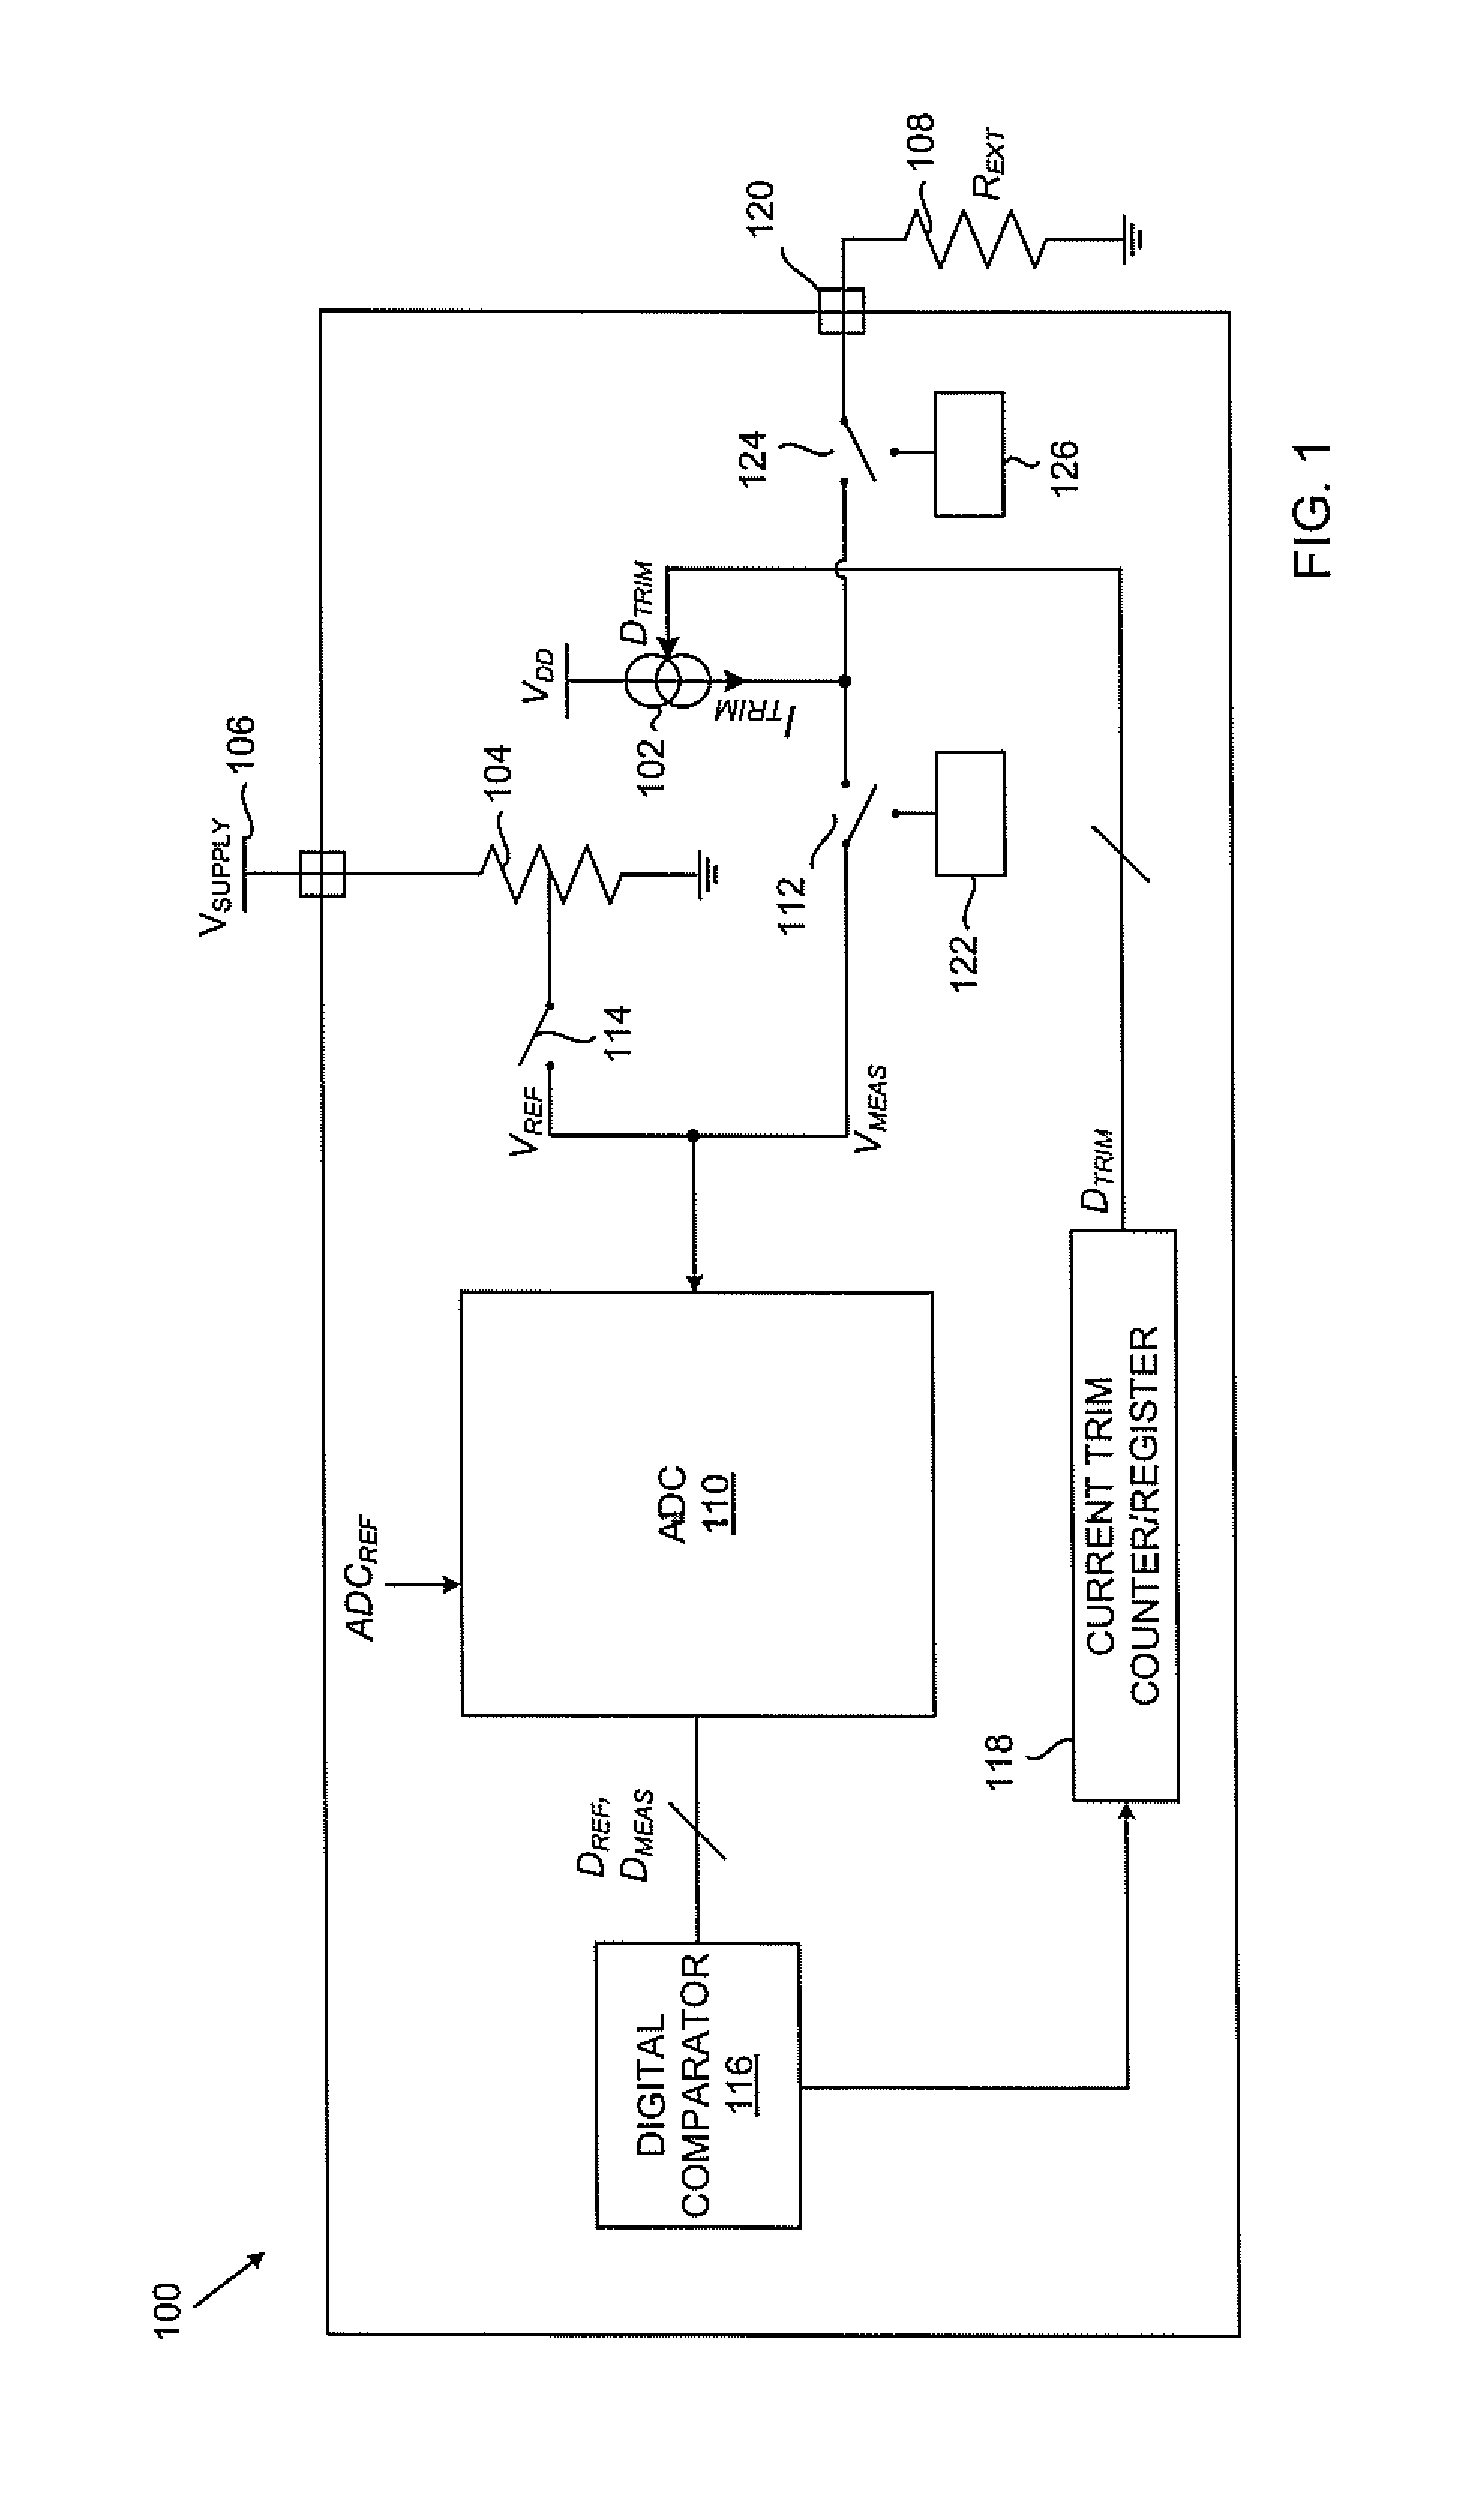 Method of trimming current source using on-chip ADC